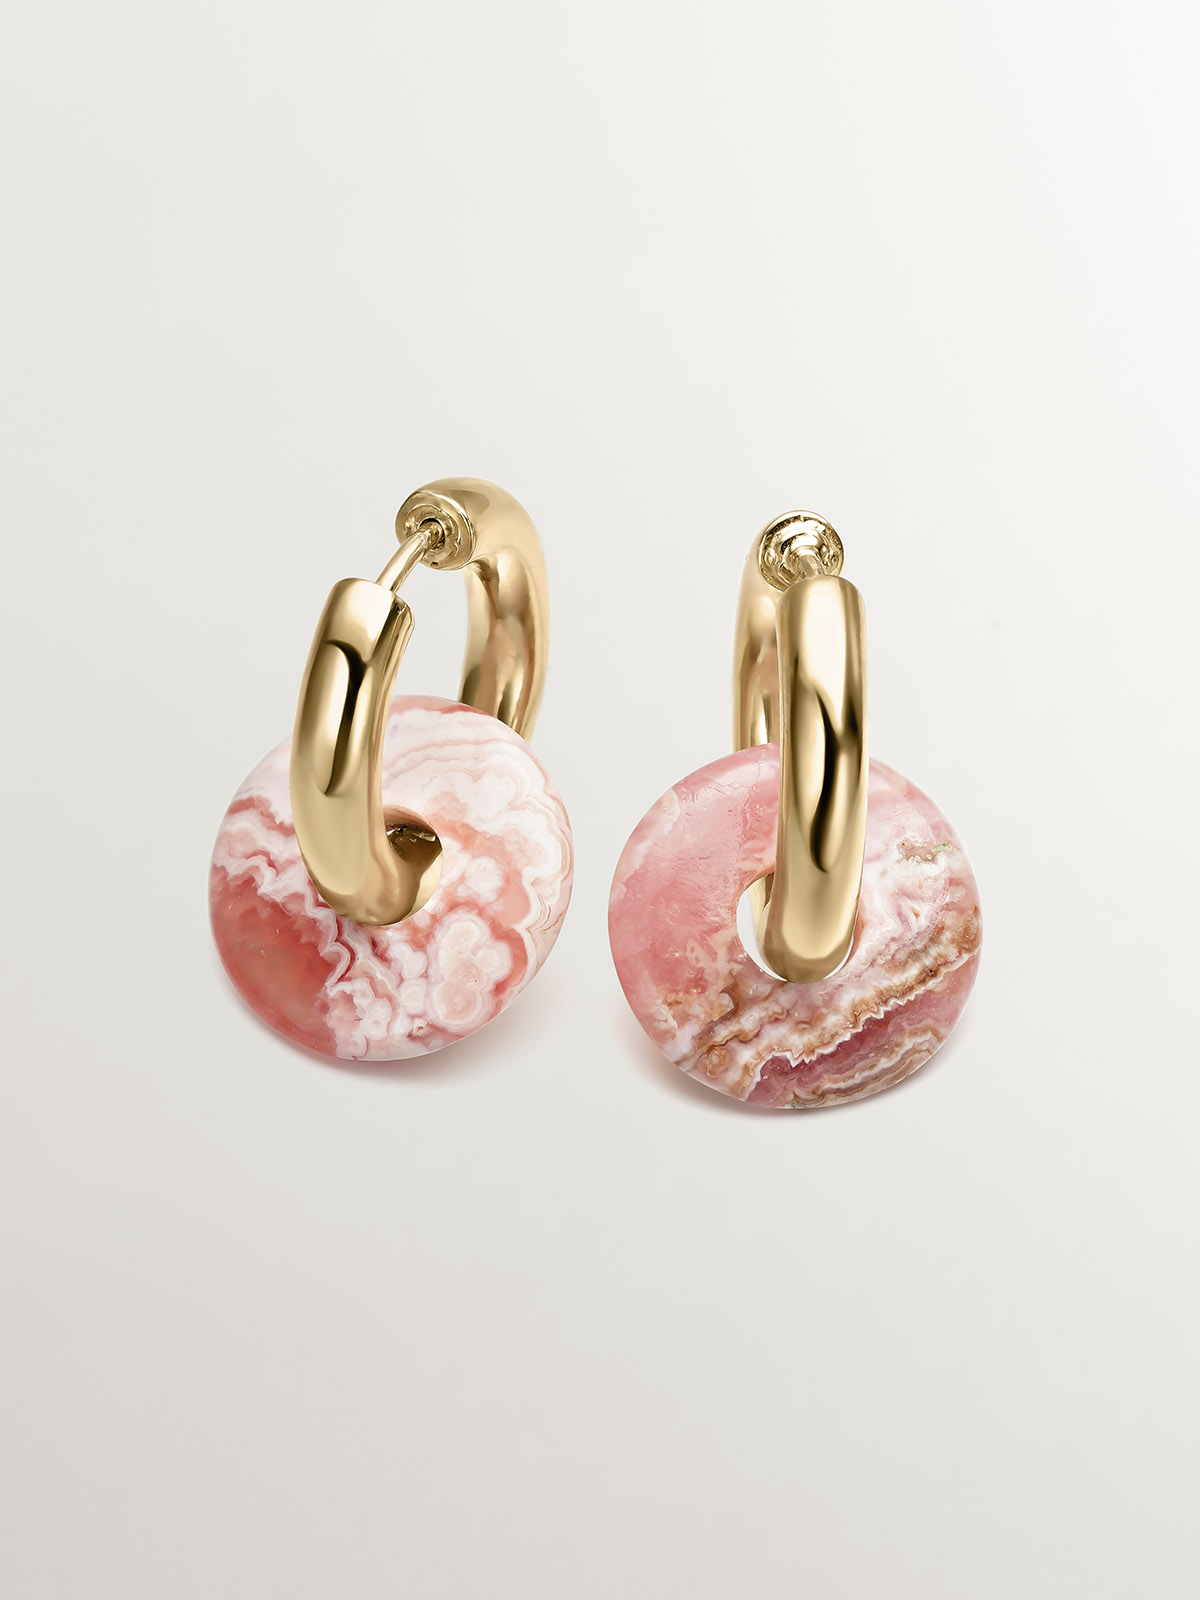 Medium hoop earrings made of 925 silver bathed in 18K yellow gold with pink rhodochrosite.